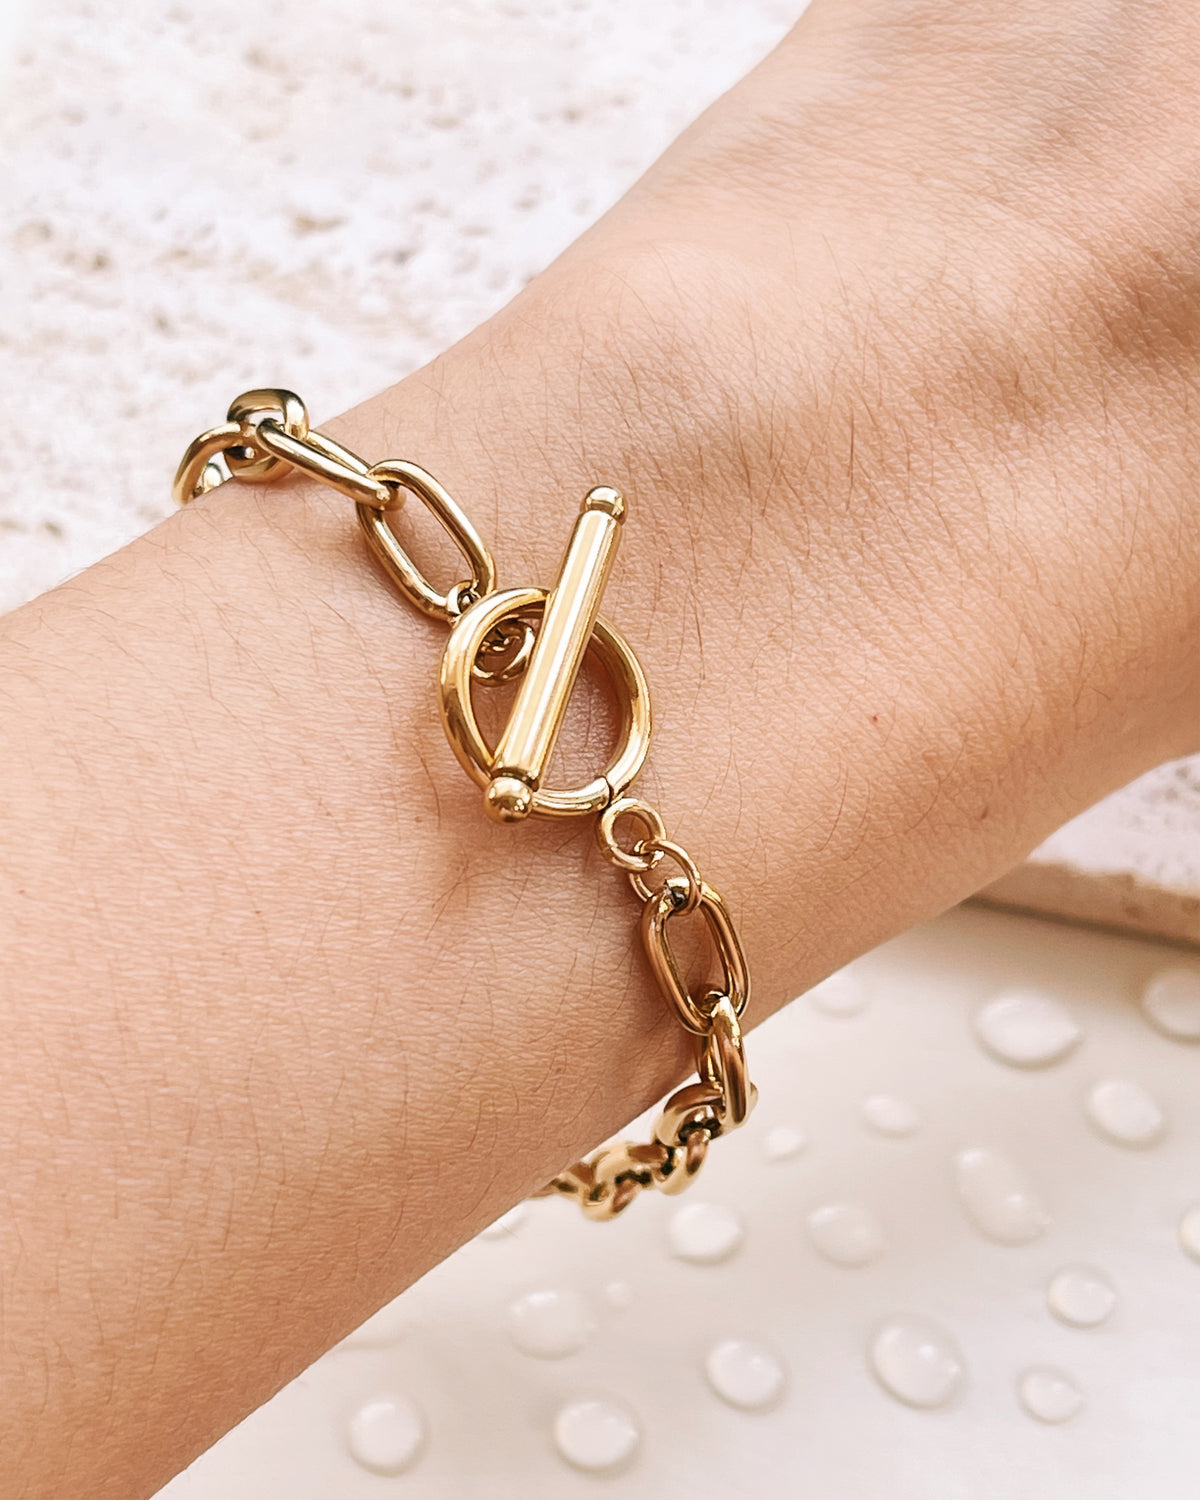 Emilia Thick Oval Link Chain with O/T Lock Design Gold Bracelet